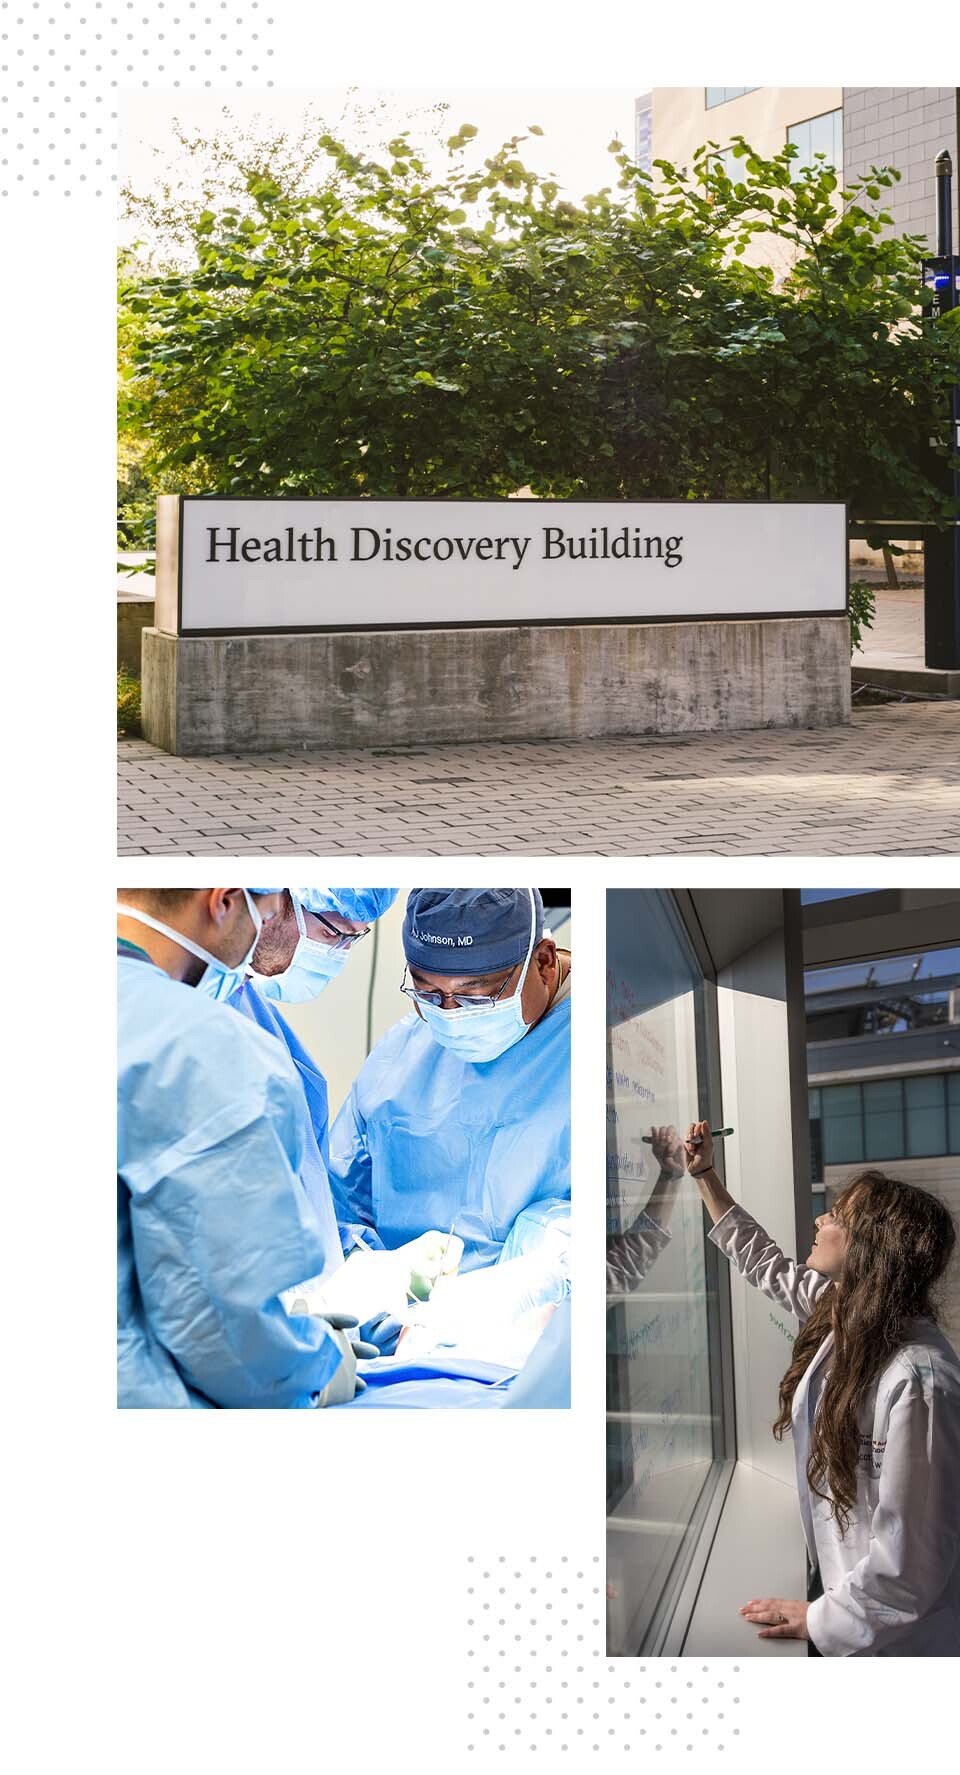 Three images collaged together: In one, exterior signage of Dell Med's Health Discovery Building. In another, three surgeons perform a procedure in an operating room. In another, a medical student writes notes on a window inside the Dell Med campus.